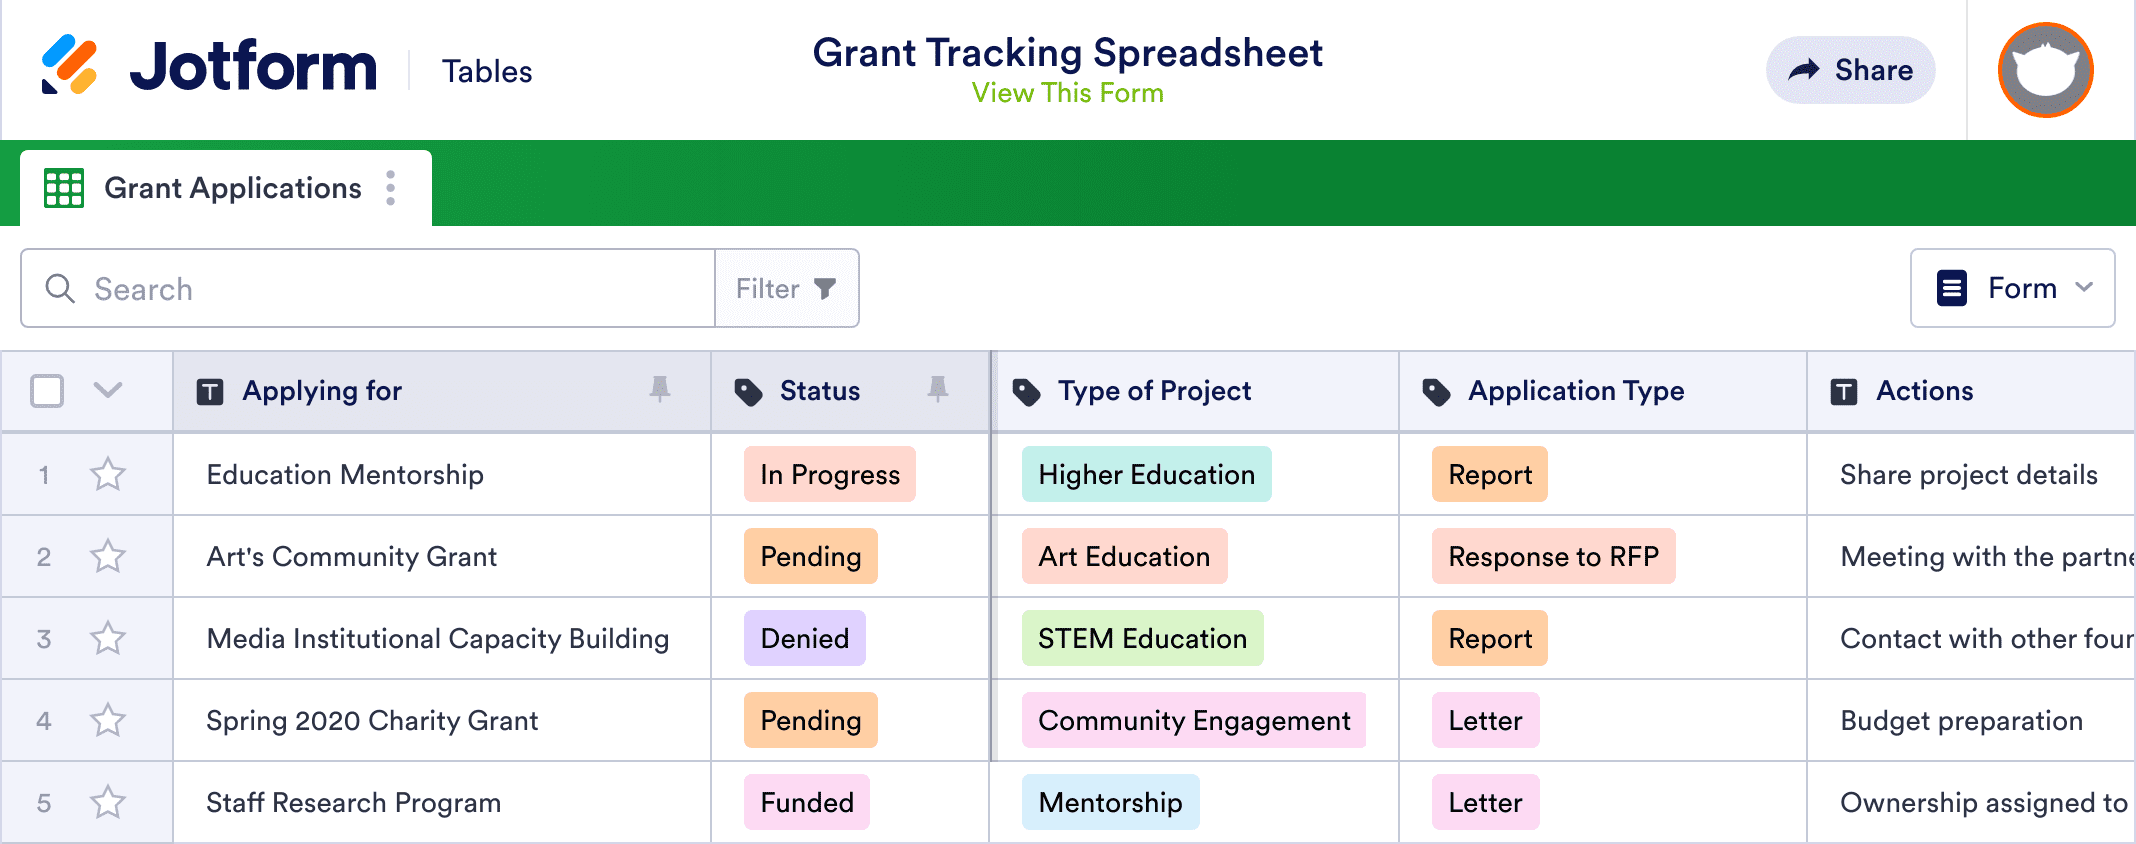 Grant Tracking Sheet Template Jotform Tables